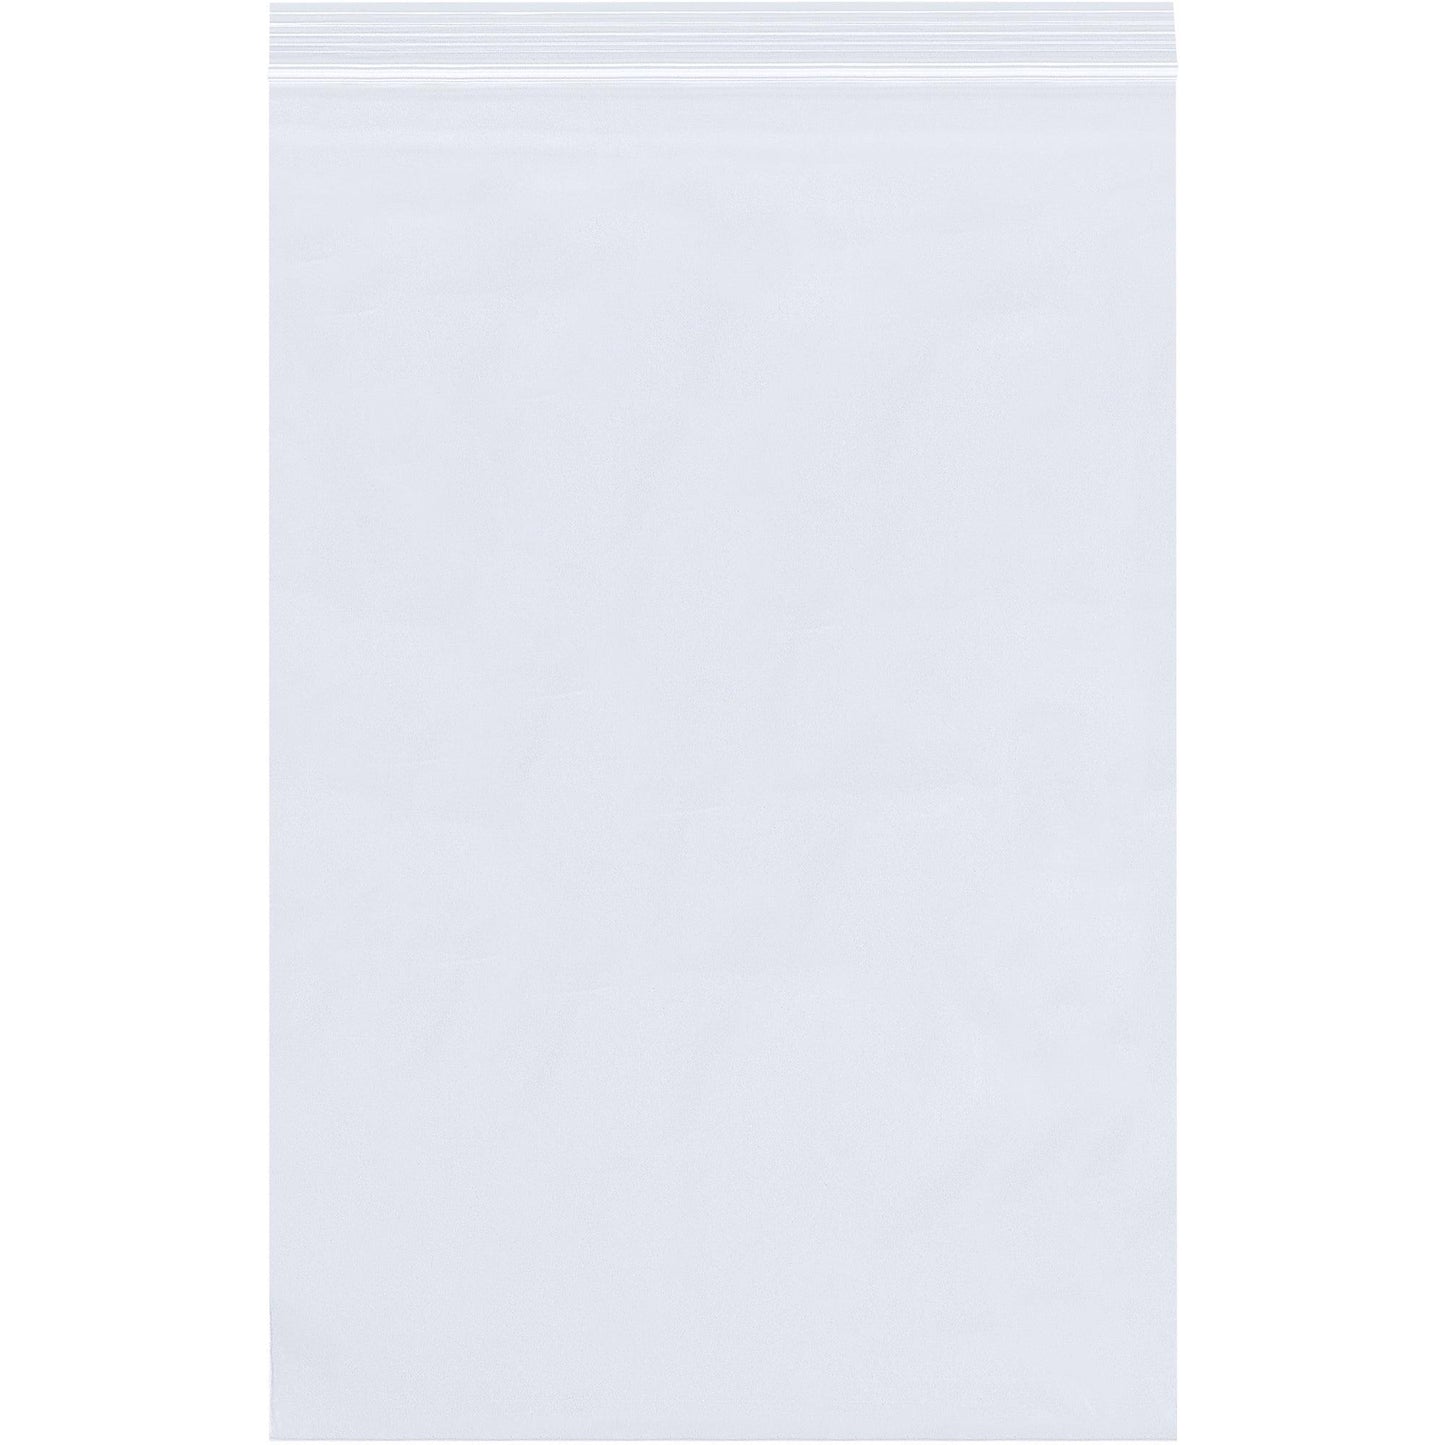 12 x 24" - 2 Mil Reclosable Poly Bags - PB4099